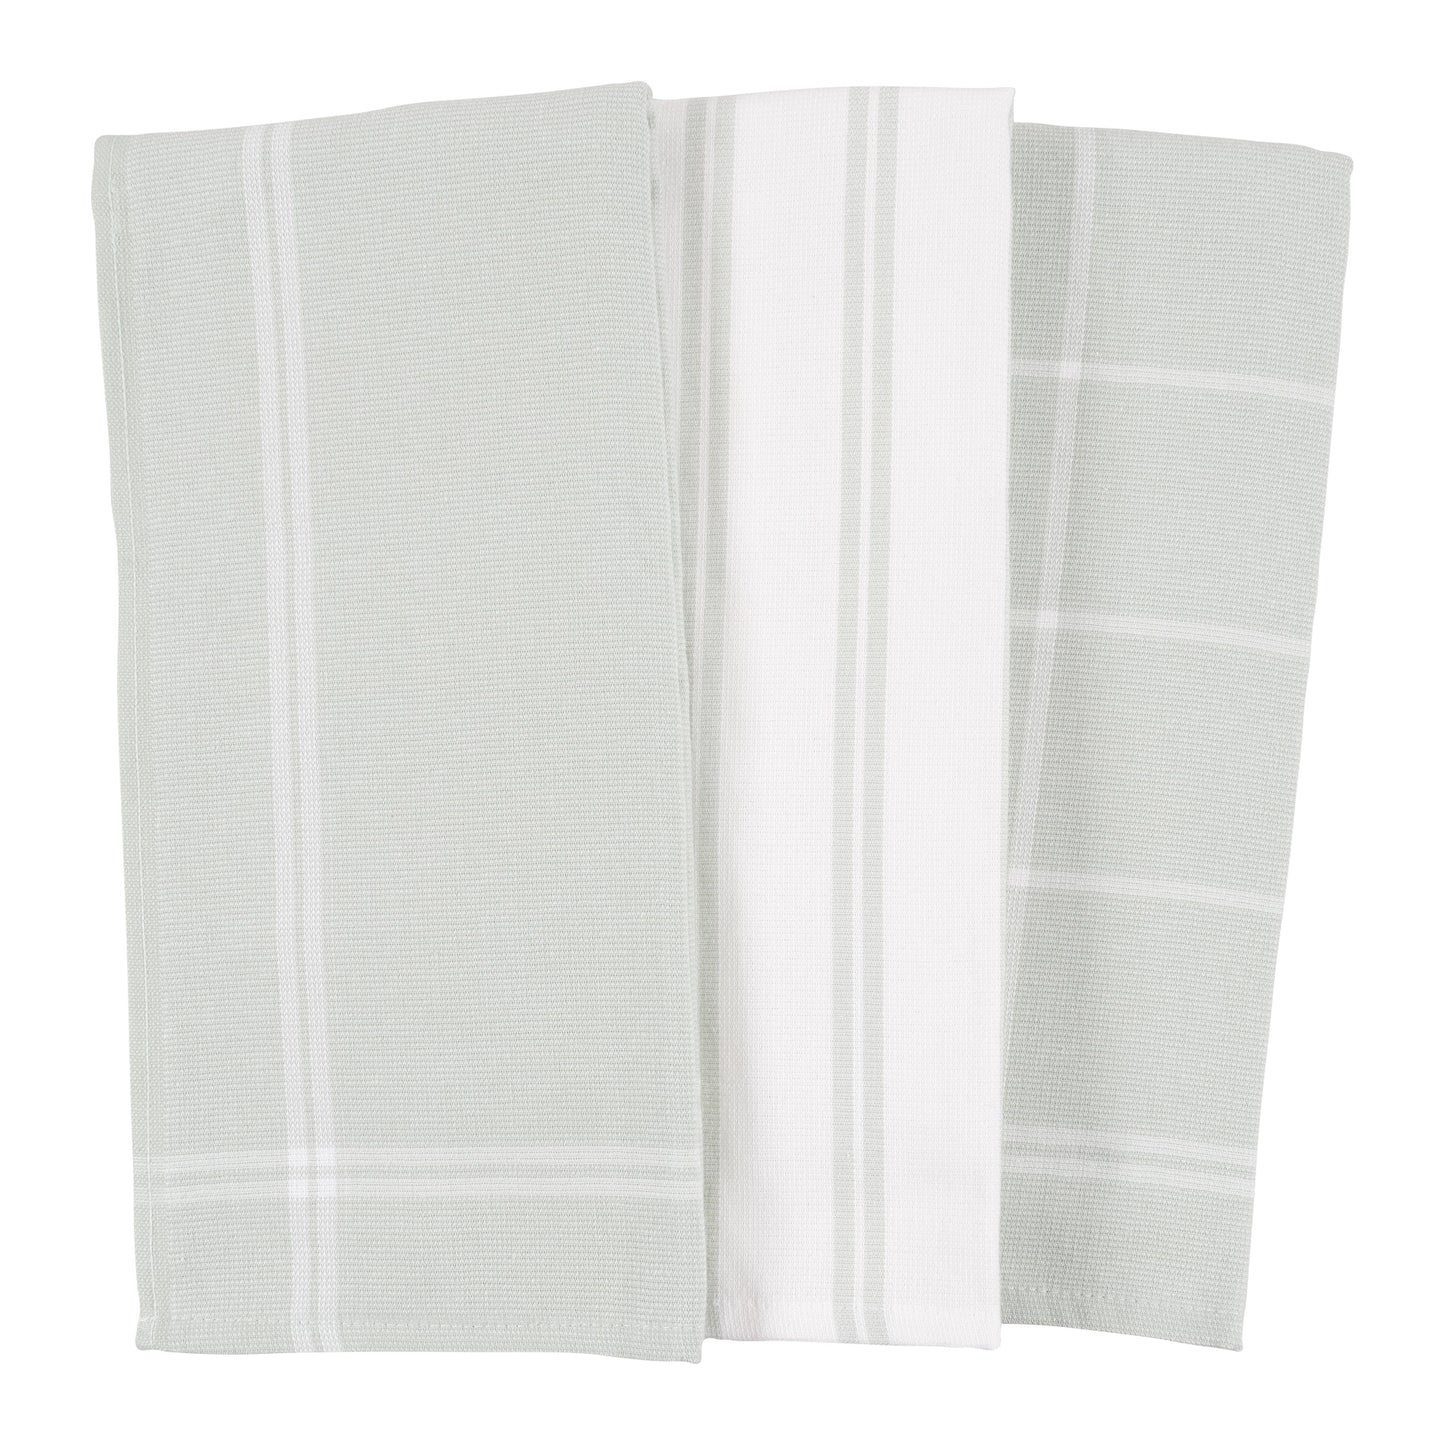 Canopy Kitchen Towels, Set of 3